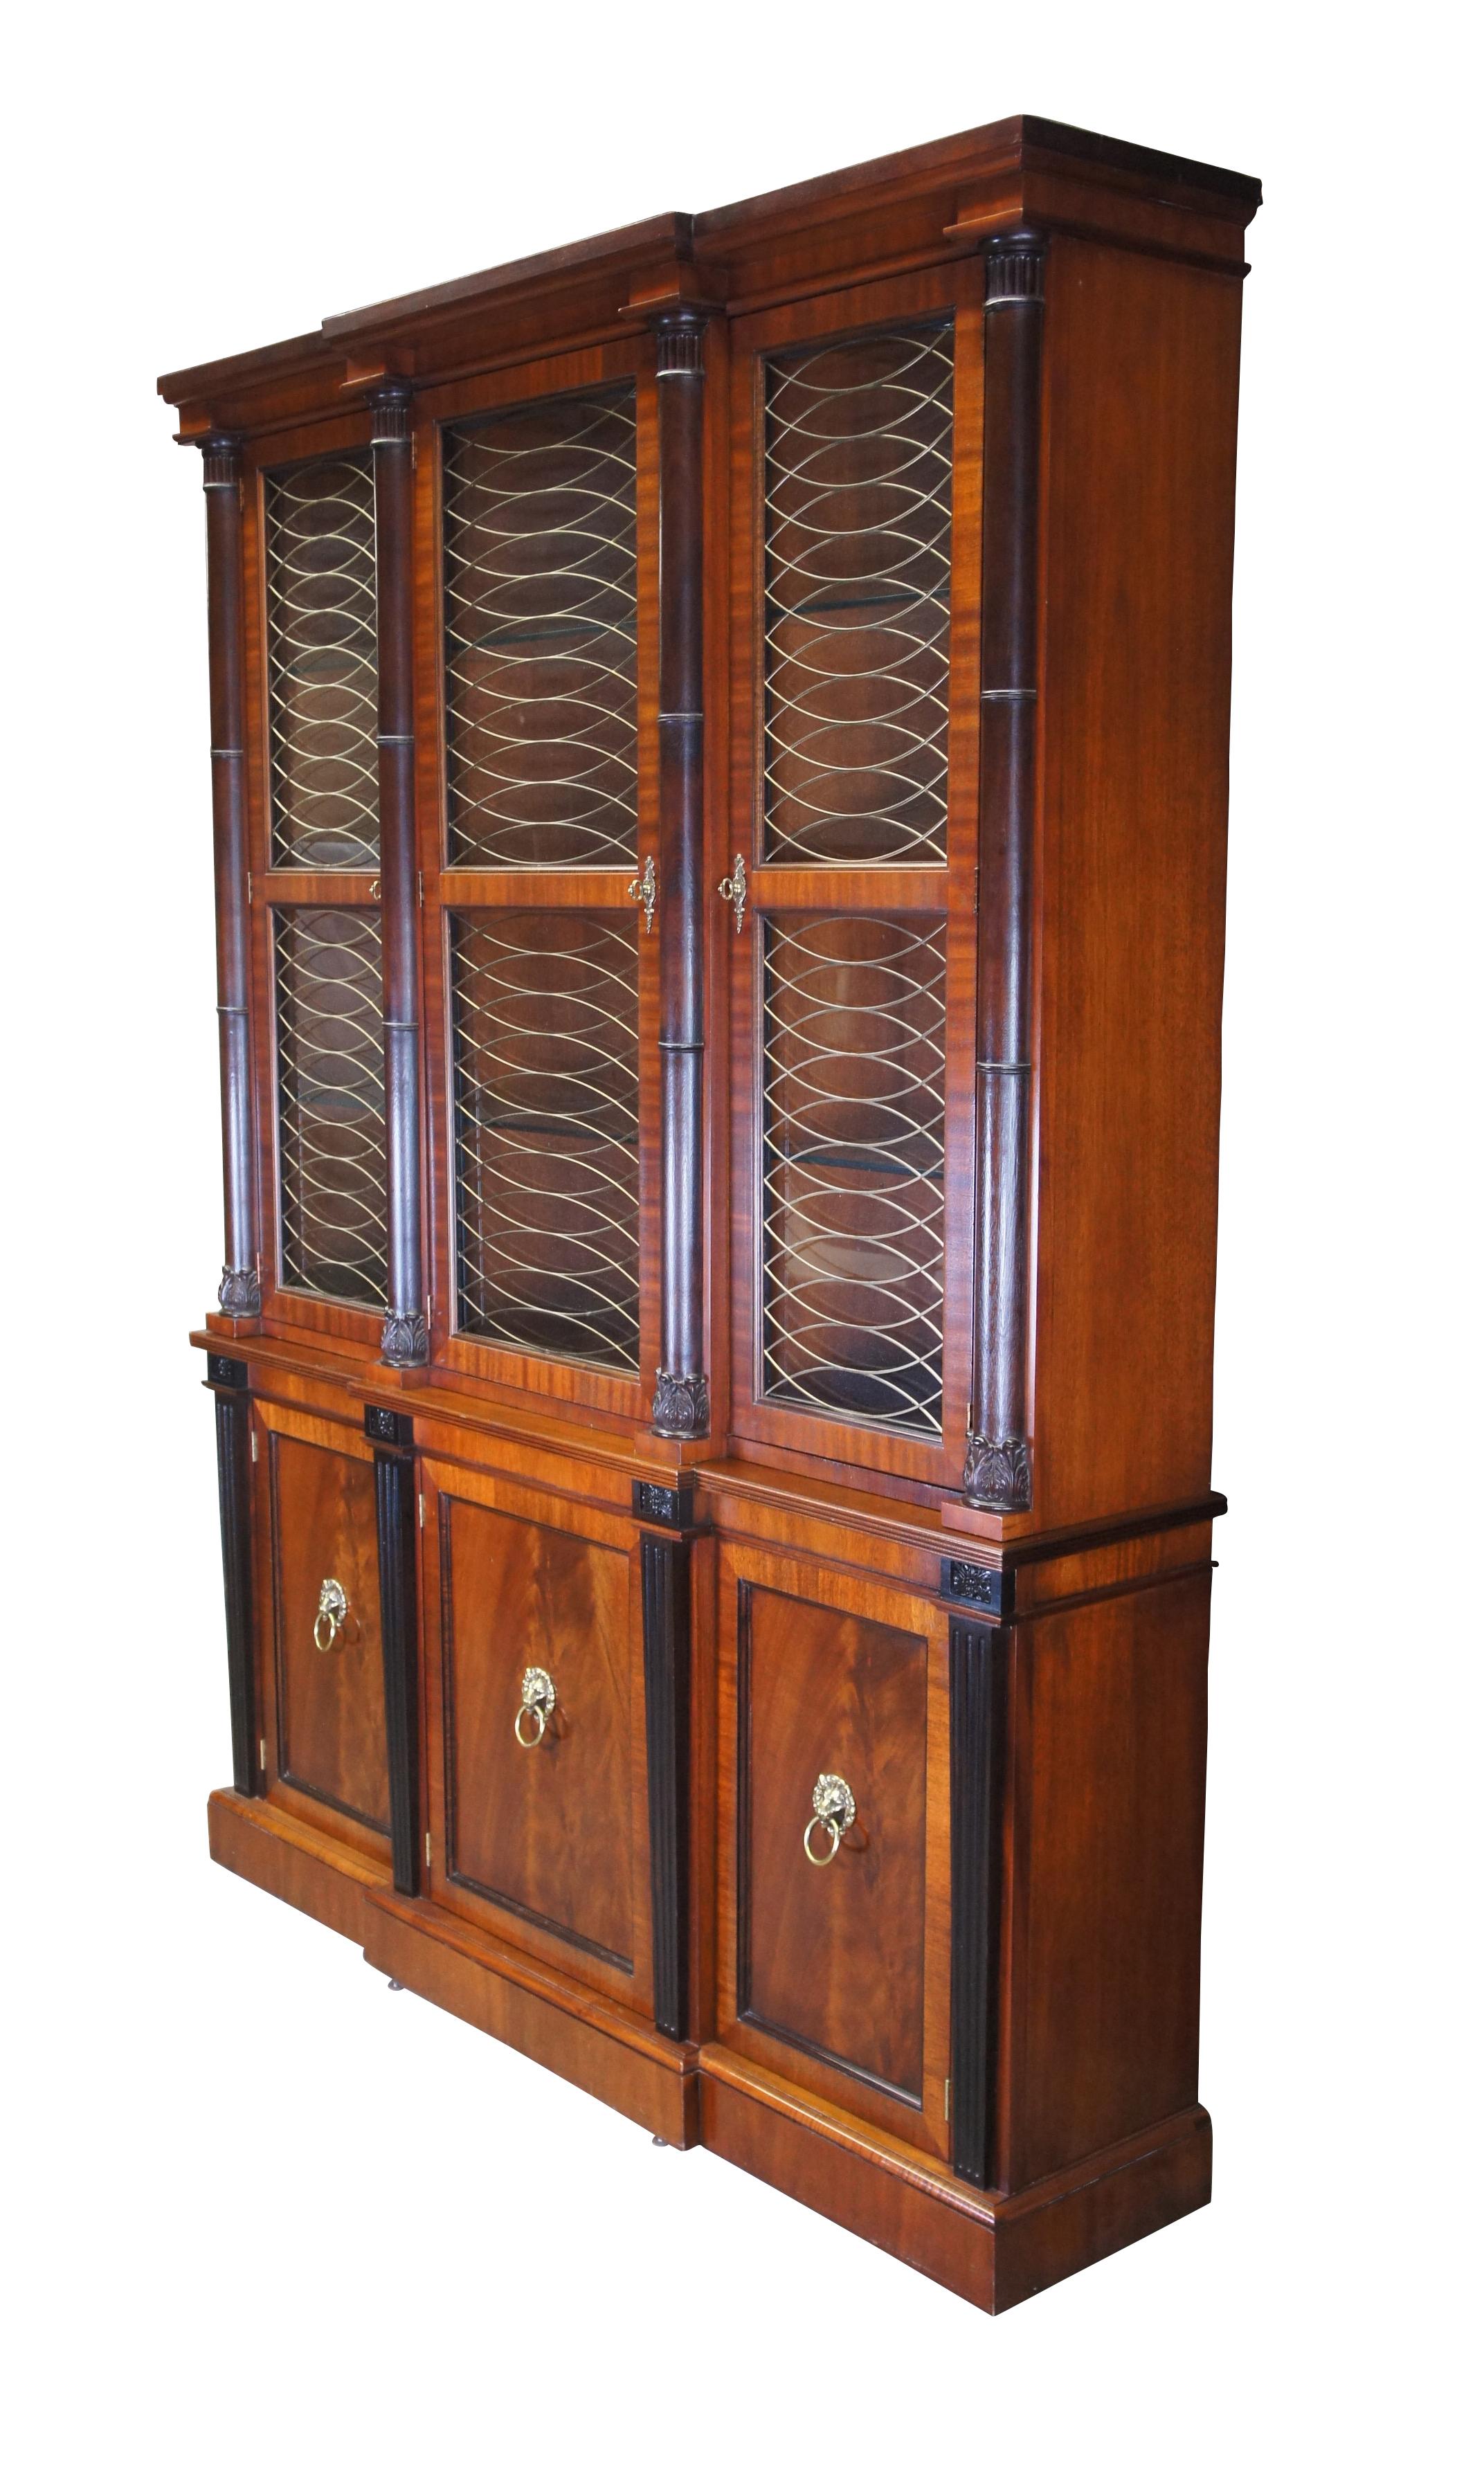 Exceptional Baker Furniture Company China Cabinet, circa early 2000s.  Inspired by English Regency, Neoclassical and French Empire styling.  A rectangular form with breakfront design made from mahogany with flame (crotch) mahogany lower door fronts.